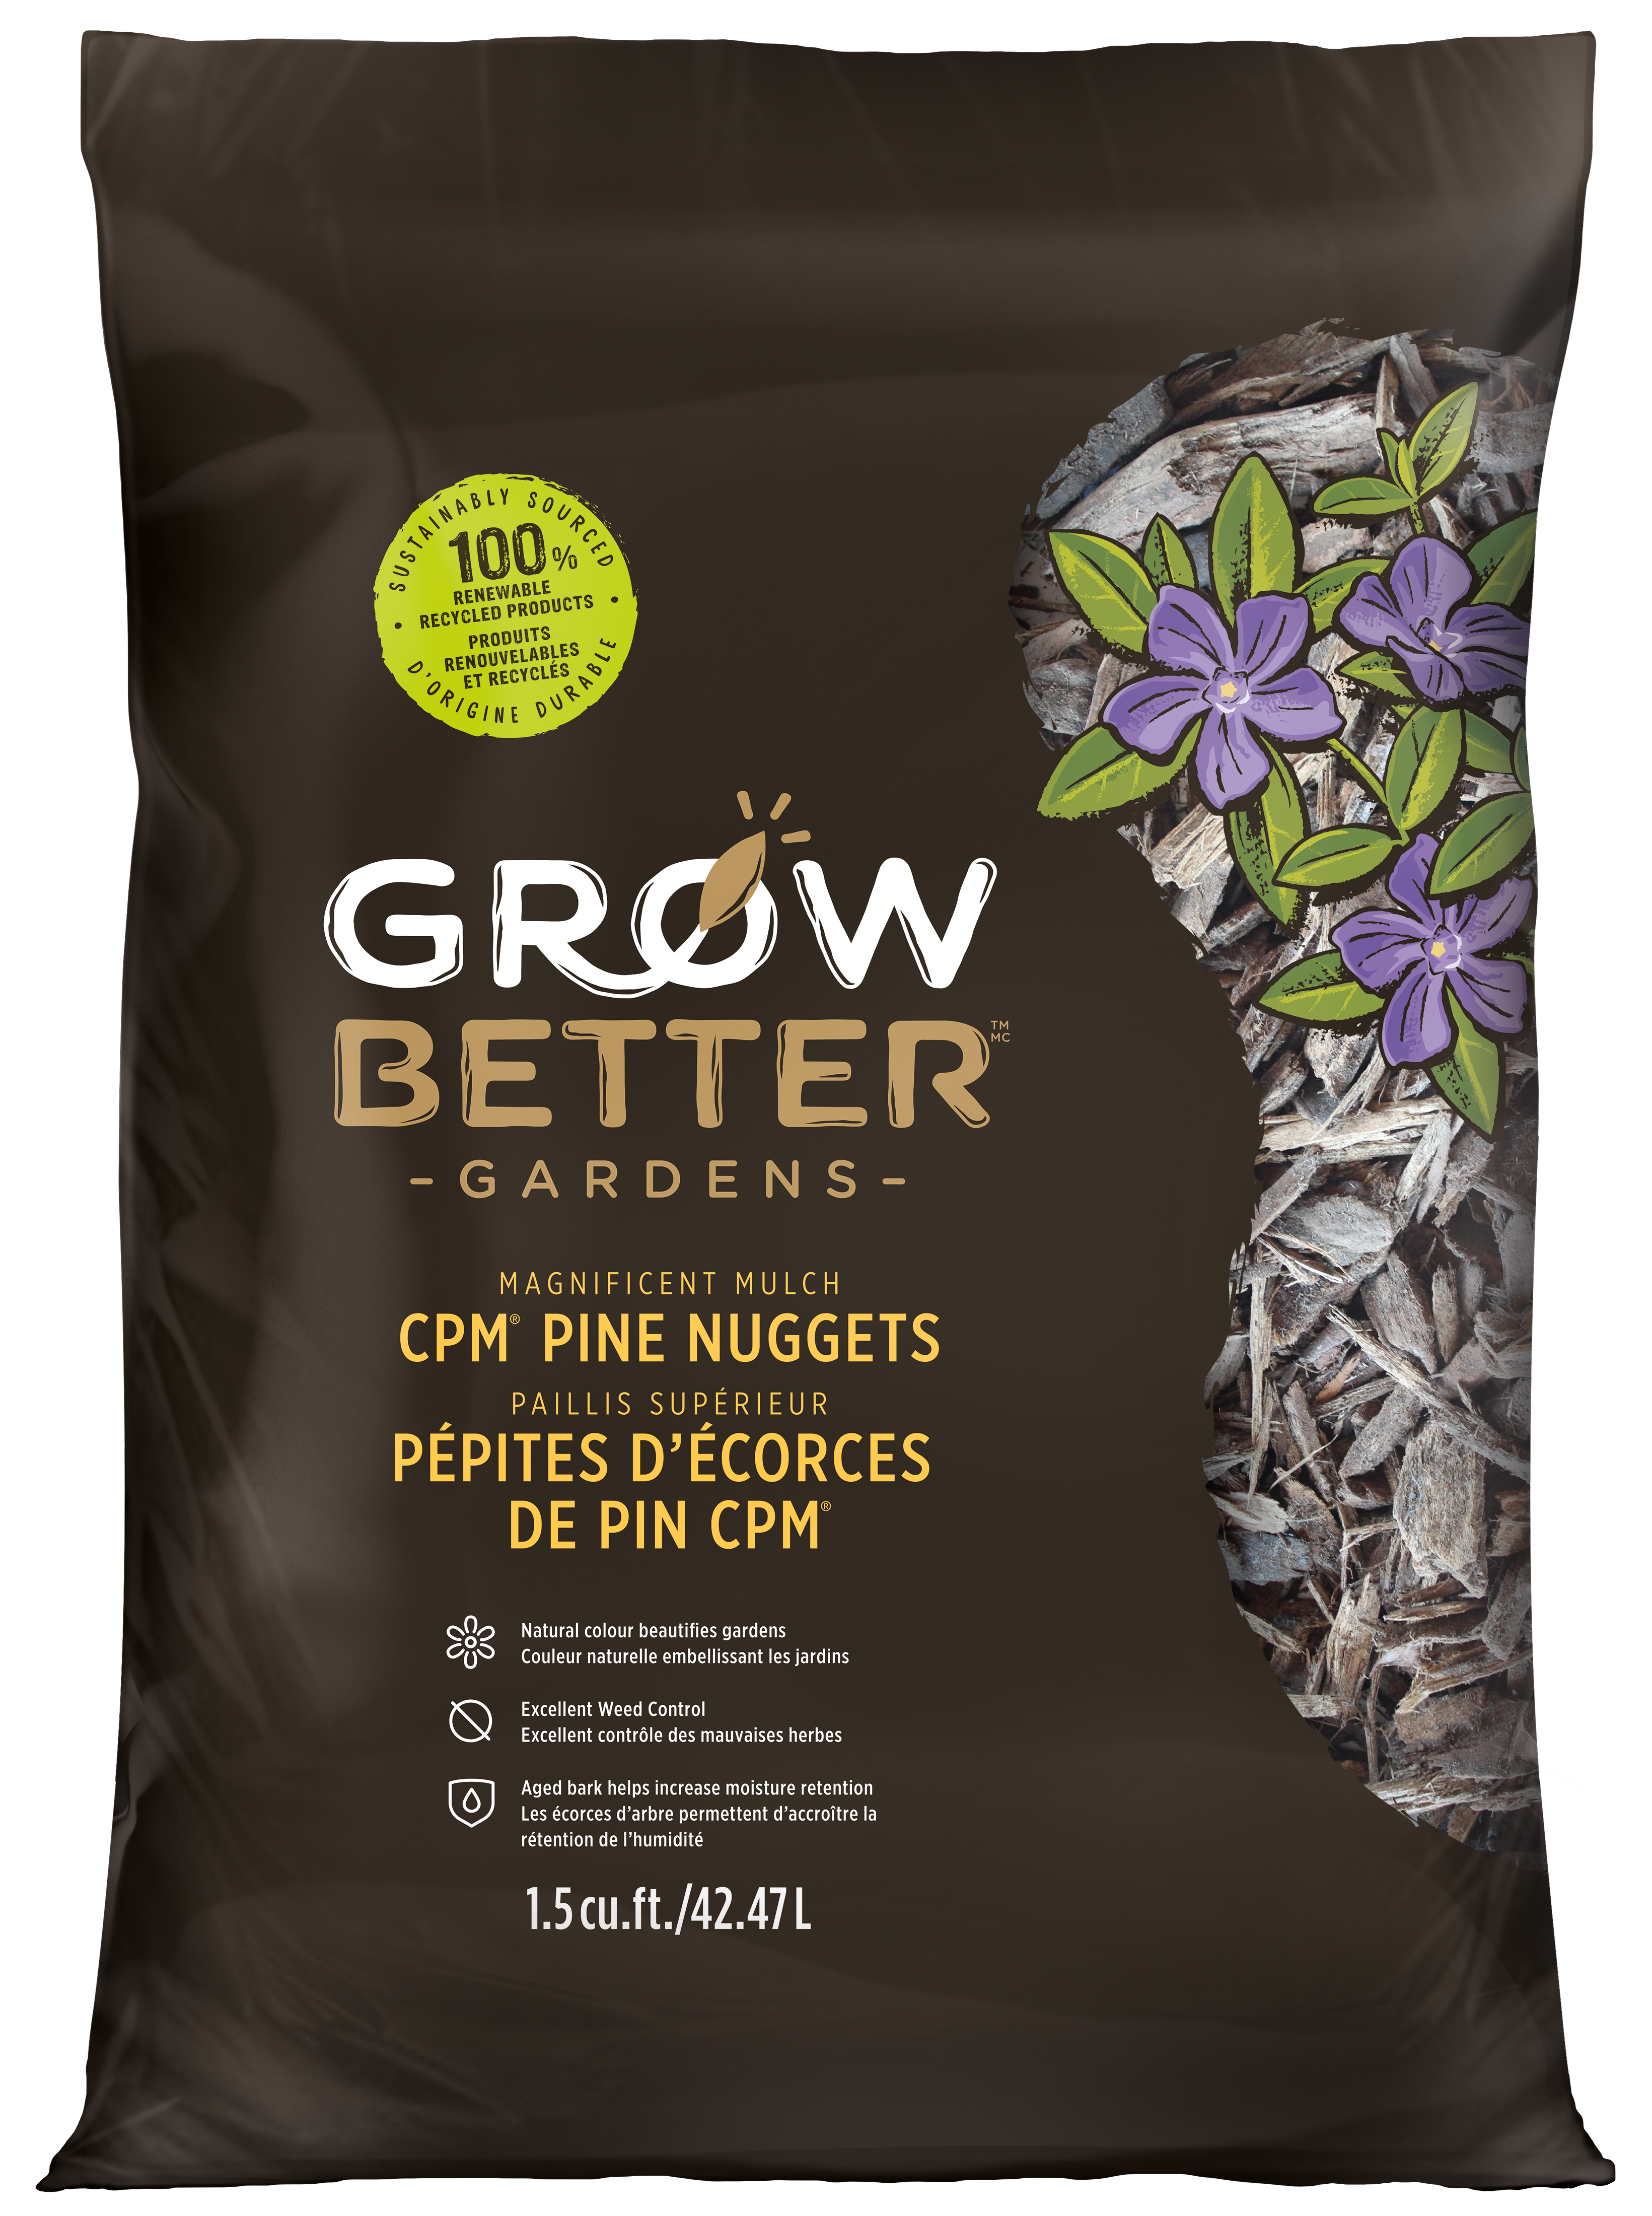 CPM Pine Nuggets